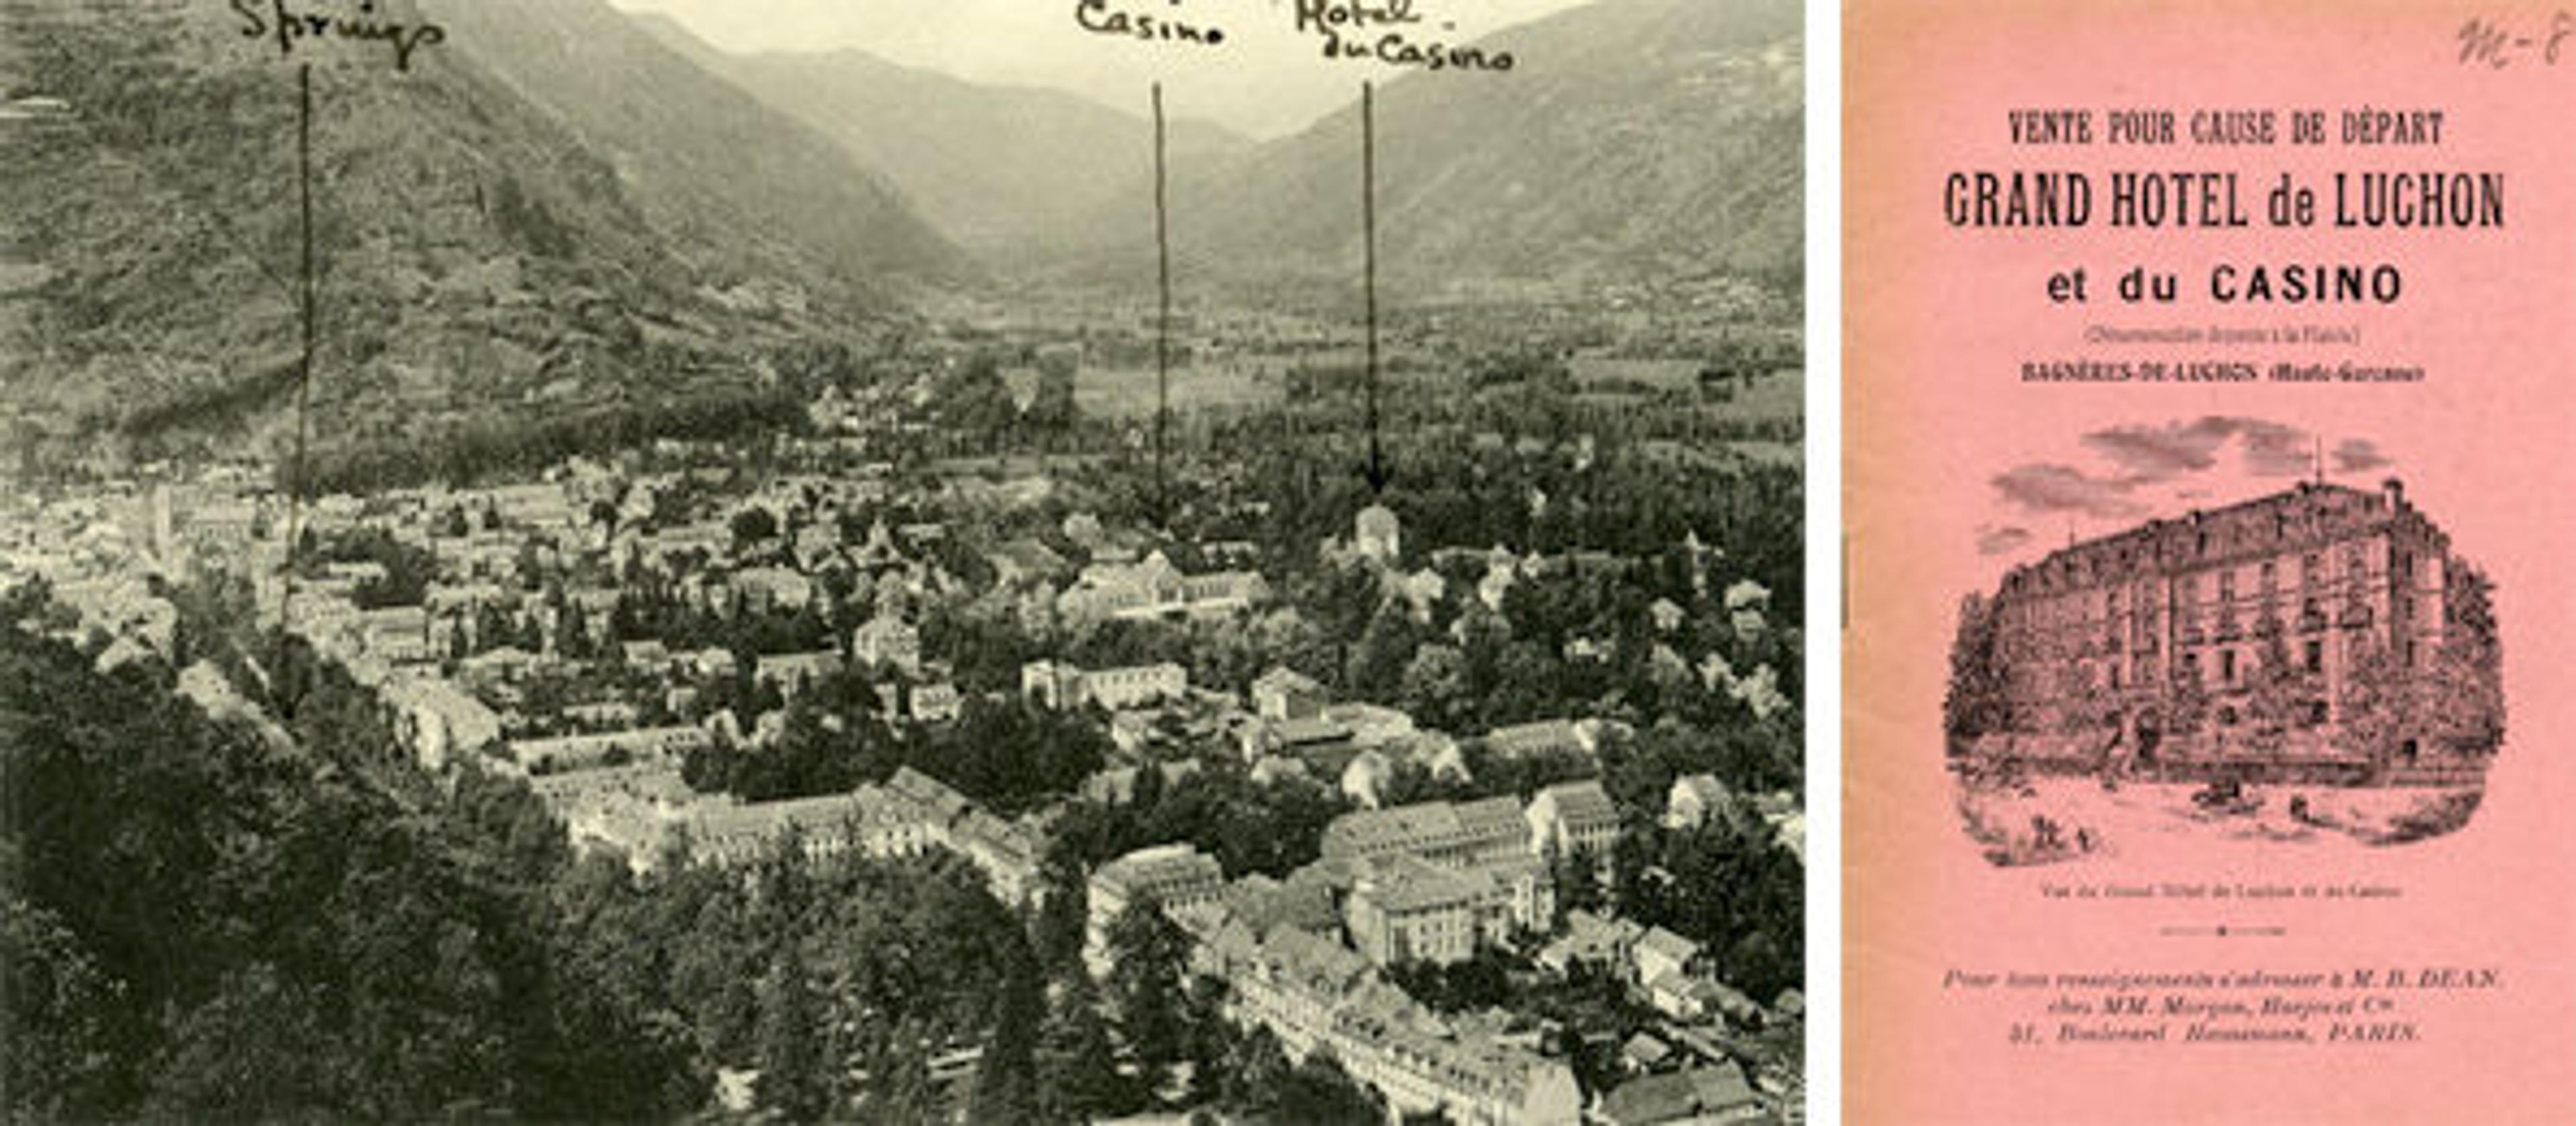 Postcard of Luchon, France, and front page of a brochure for the Riggs property there